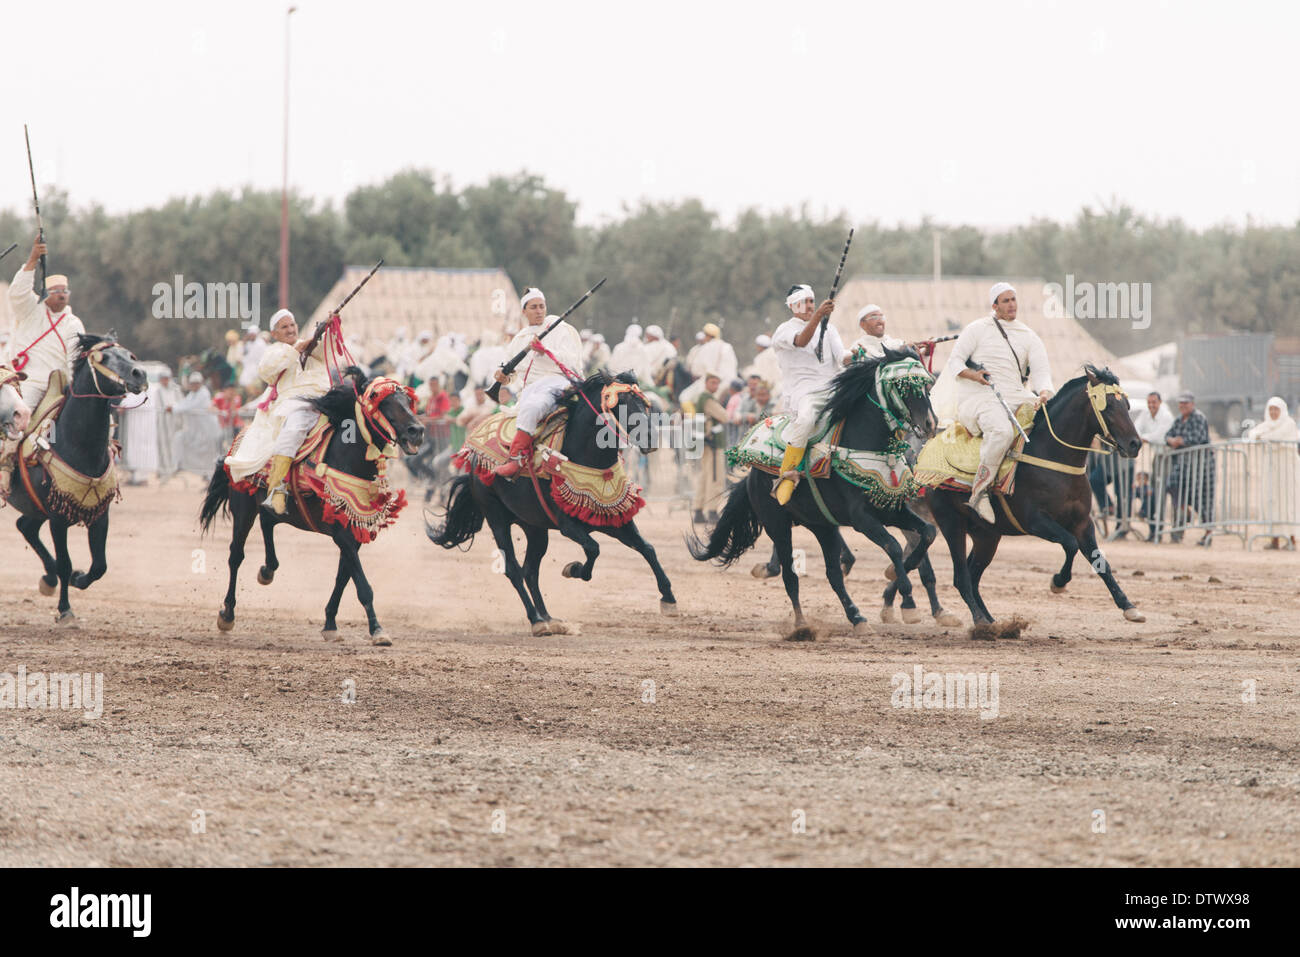 Horseriders performing at a Moroccan horse festival known as 'fantasia' Stock Photo